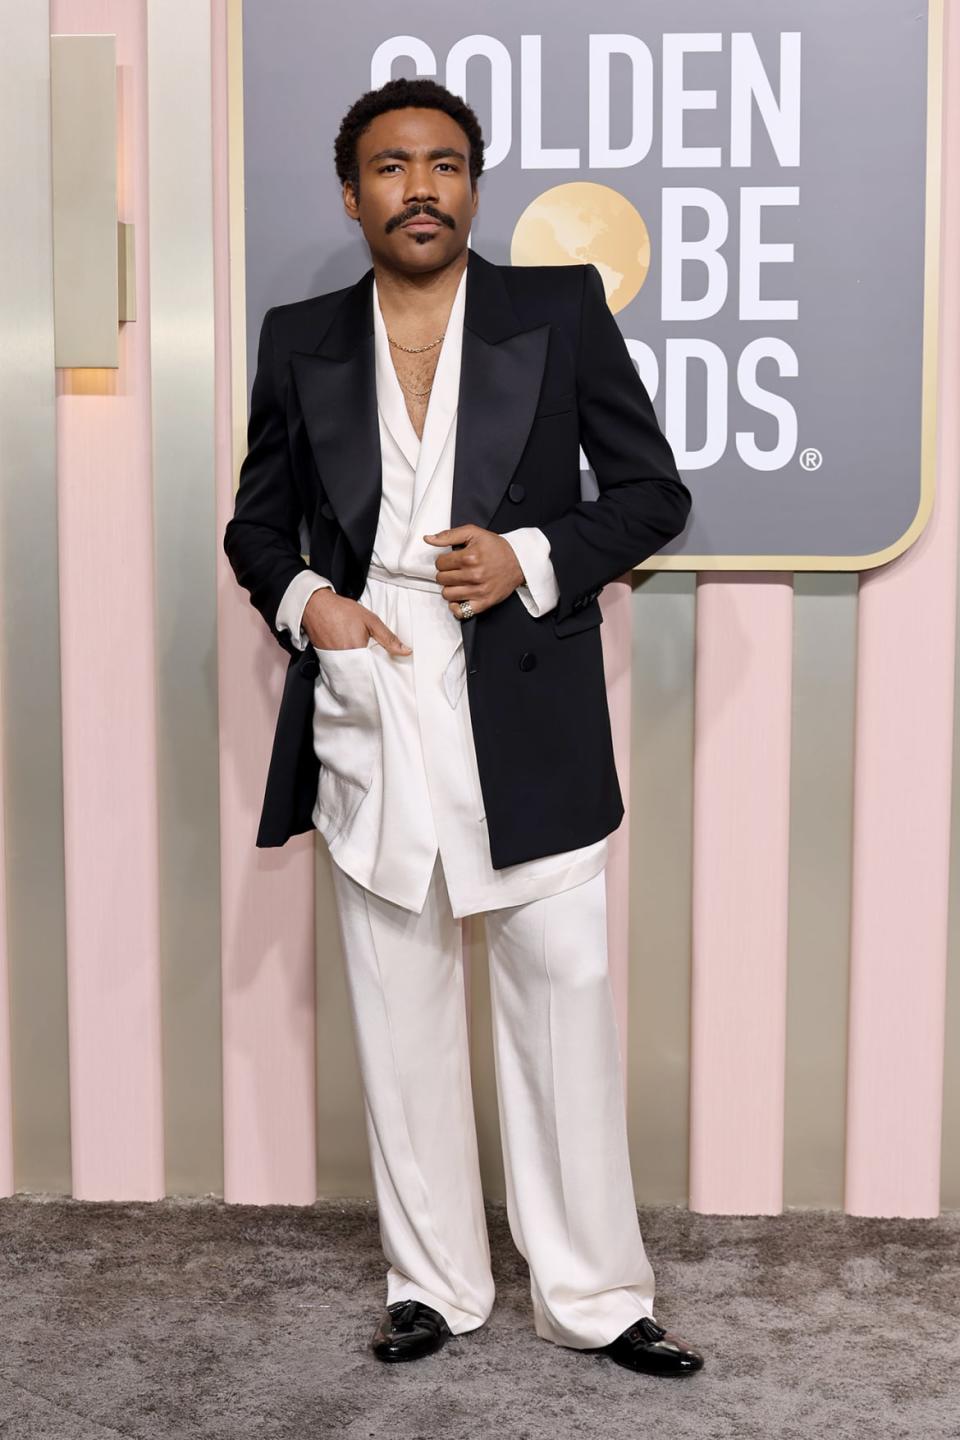 <div class="inline-image__caption"><p>Donald Glover attends the 80th Annual Golden Globe Awards at The Beverly Hilton on January 10, 2023 in Beverly Hills, California.</p></div> <div class="inline-image__credit">Amy Sussman/Getty Images</div>